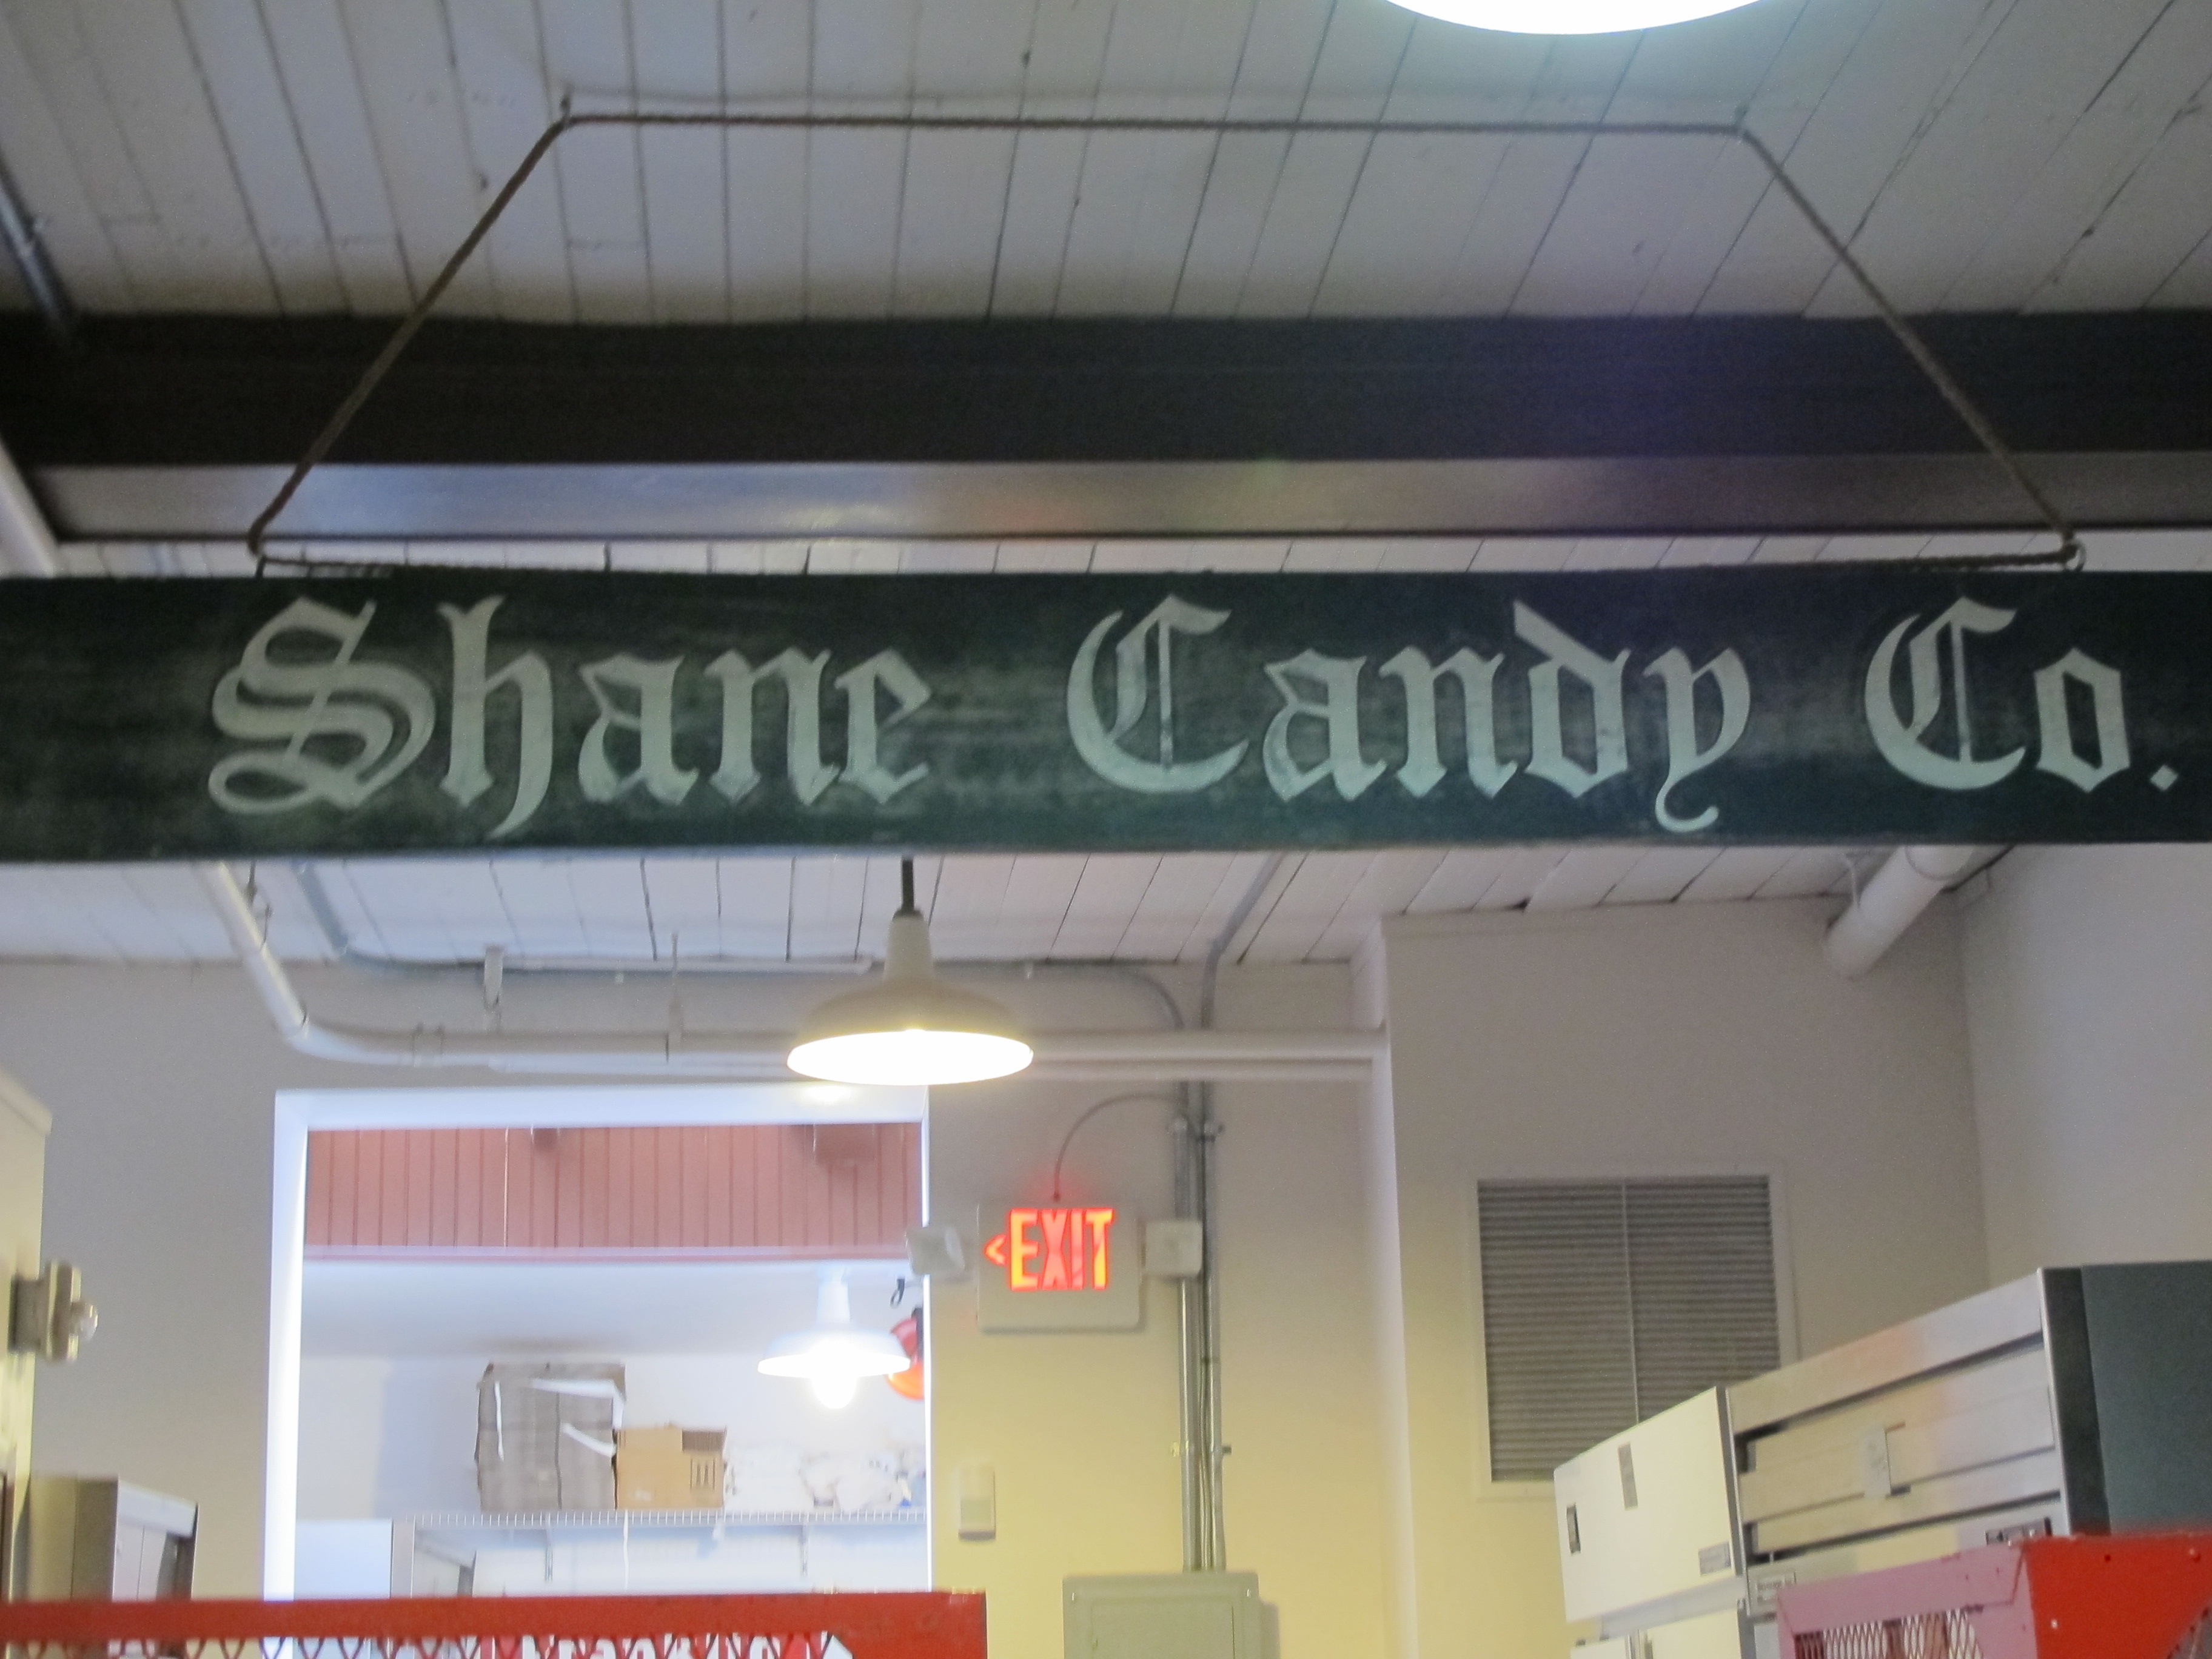 Shane, a Philadelphia candy institution dating back to 1863, reopens this month